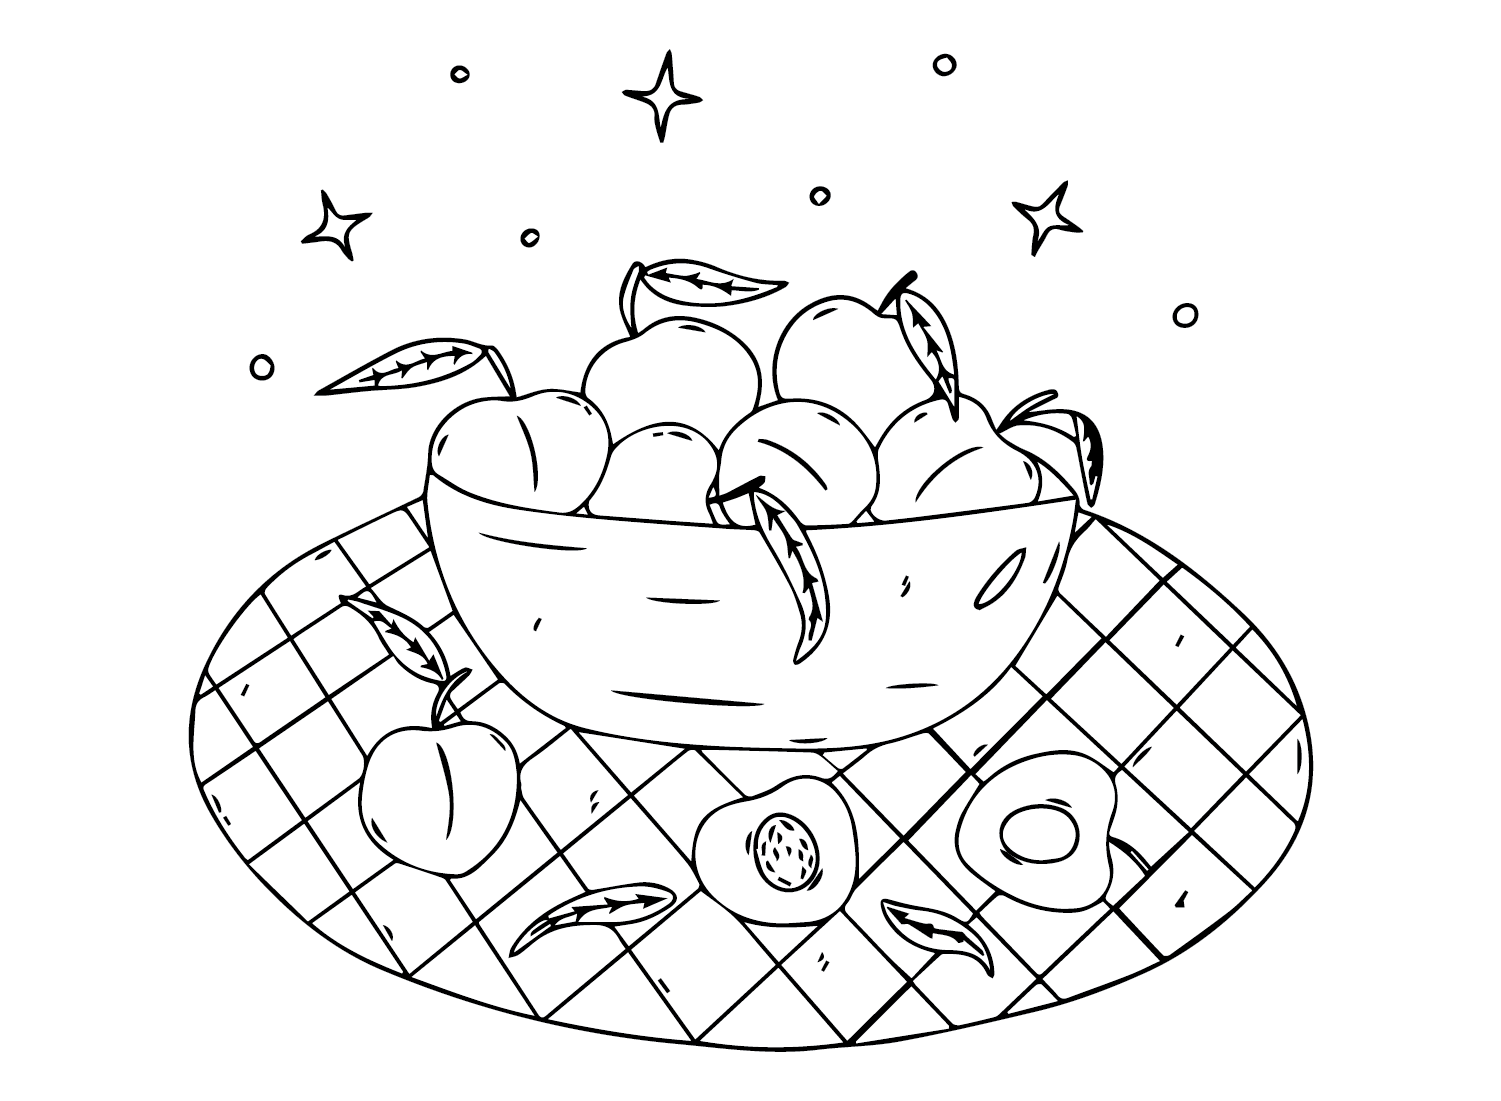 Nectarine Dessert Coloring Page